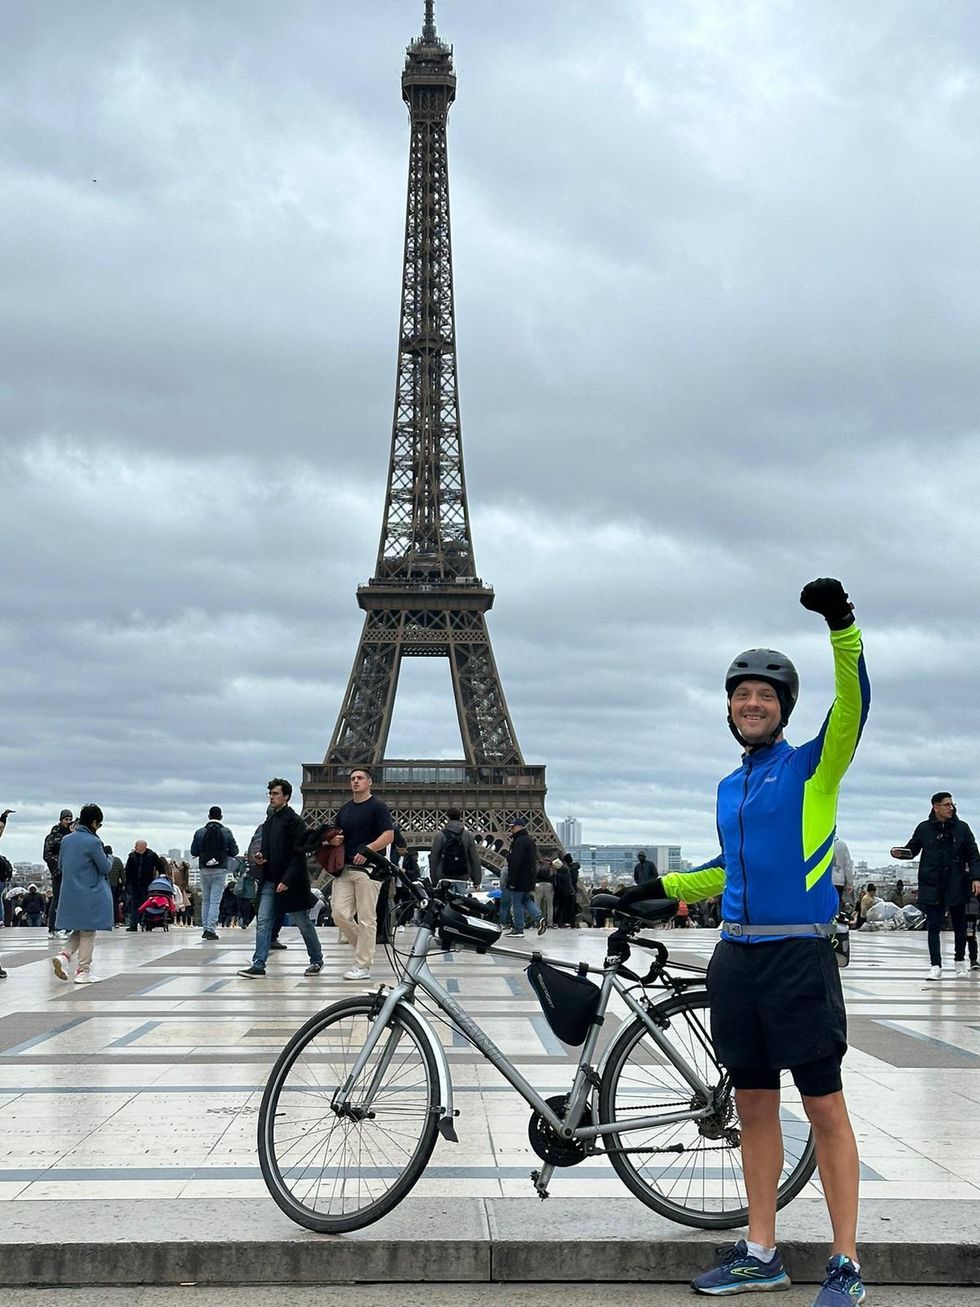 Cancer patient’s 200-mile cycle ‘shows what can be done’ despite chemo